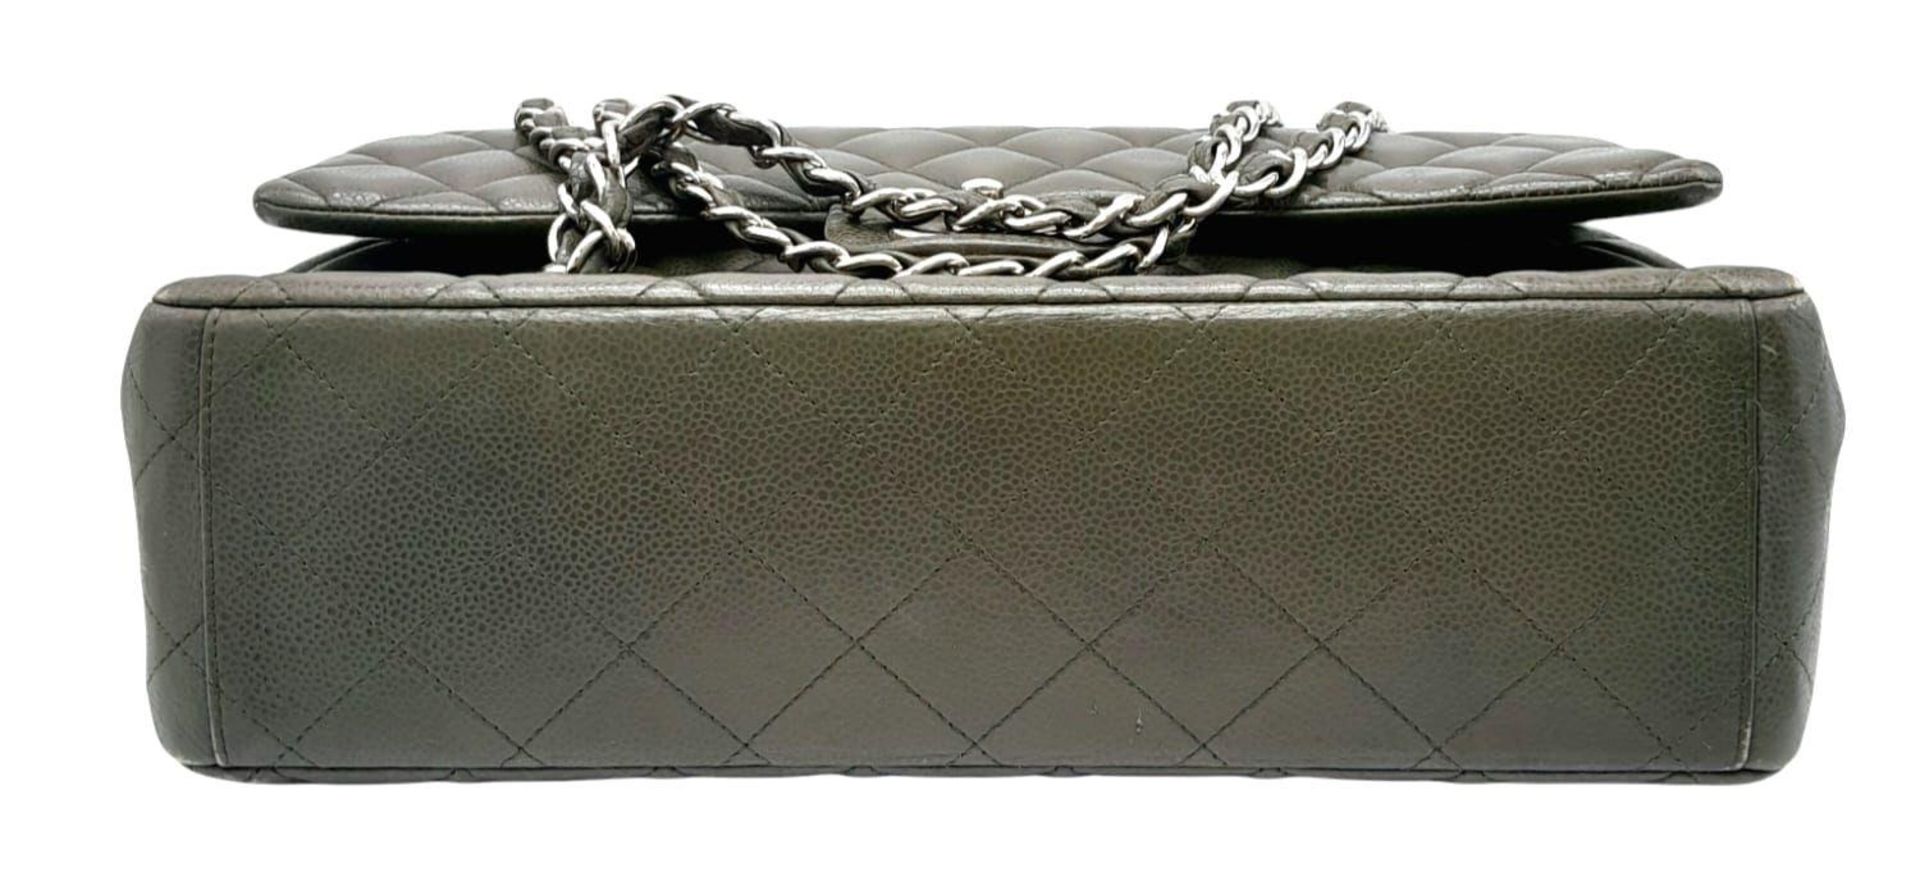 A Chanel Green Jumbo Classic Double Flap Bag. Quilted leather exterior with silver-toned hardware, - Image 6 of 14